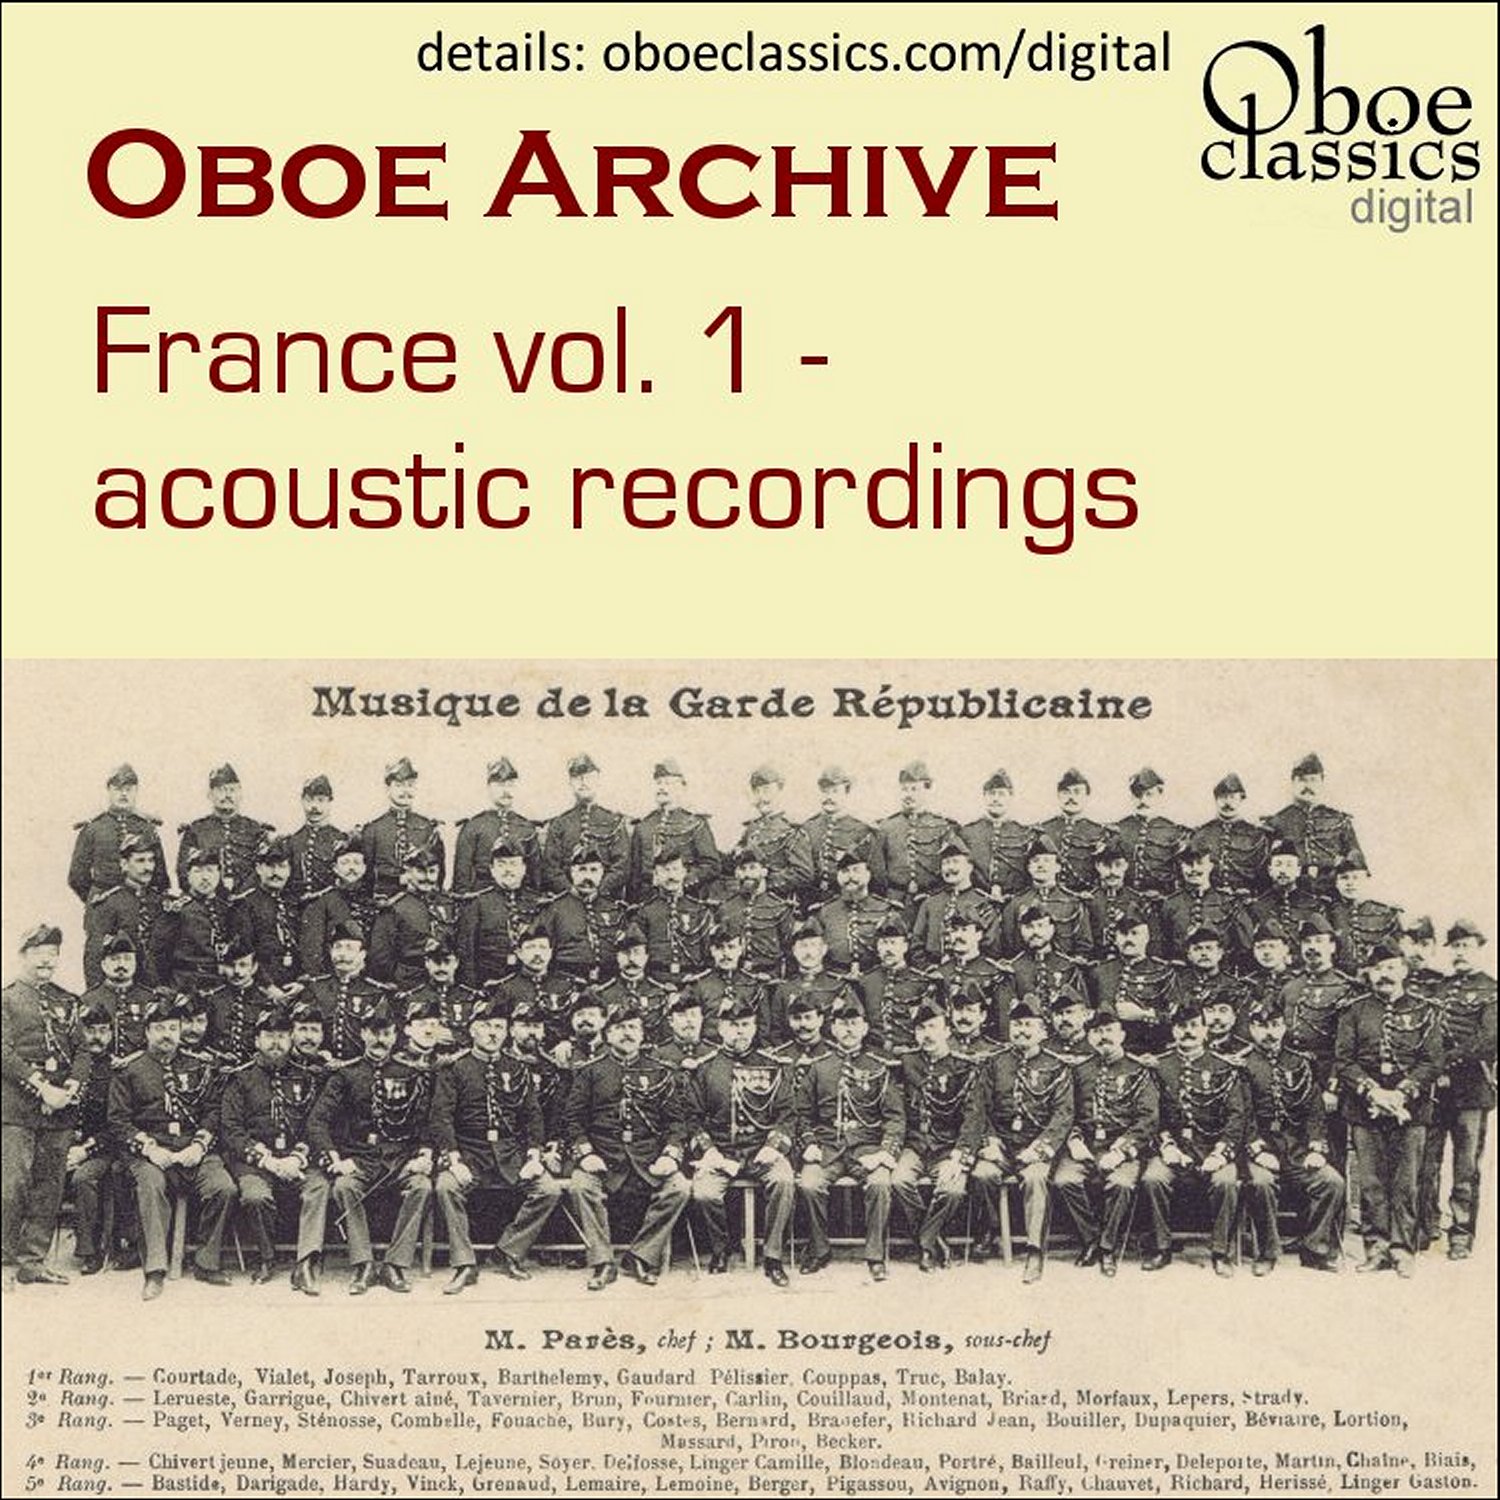 The French Accent CD cover